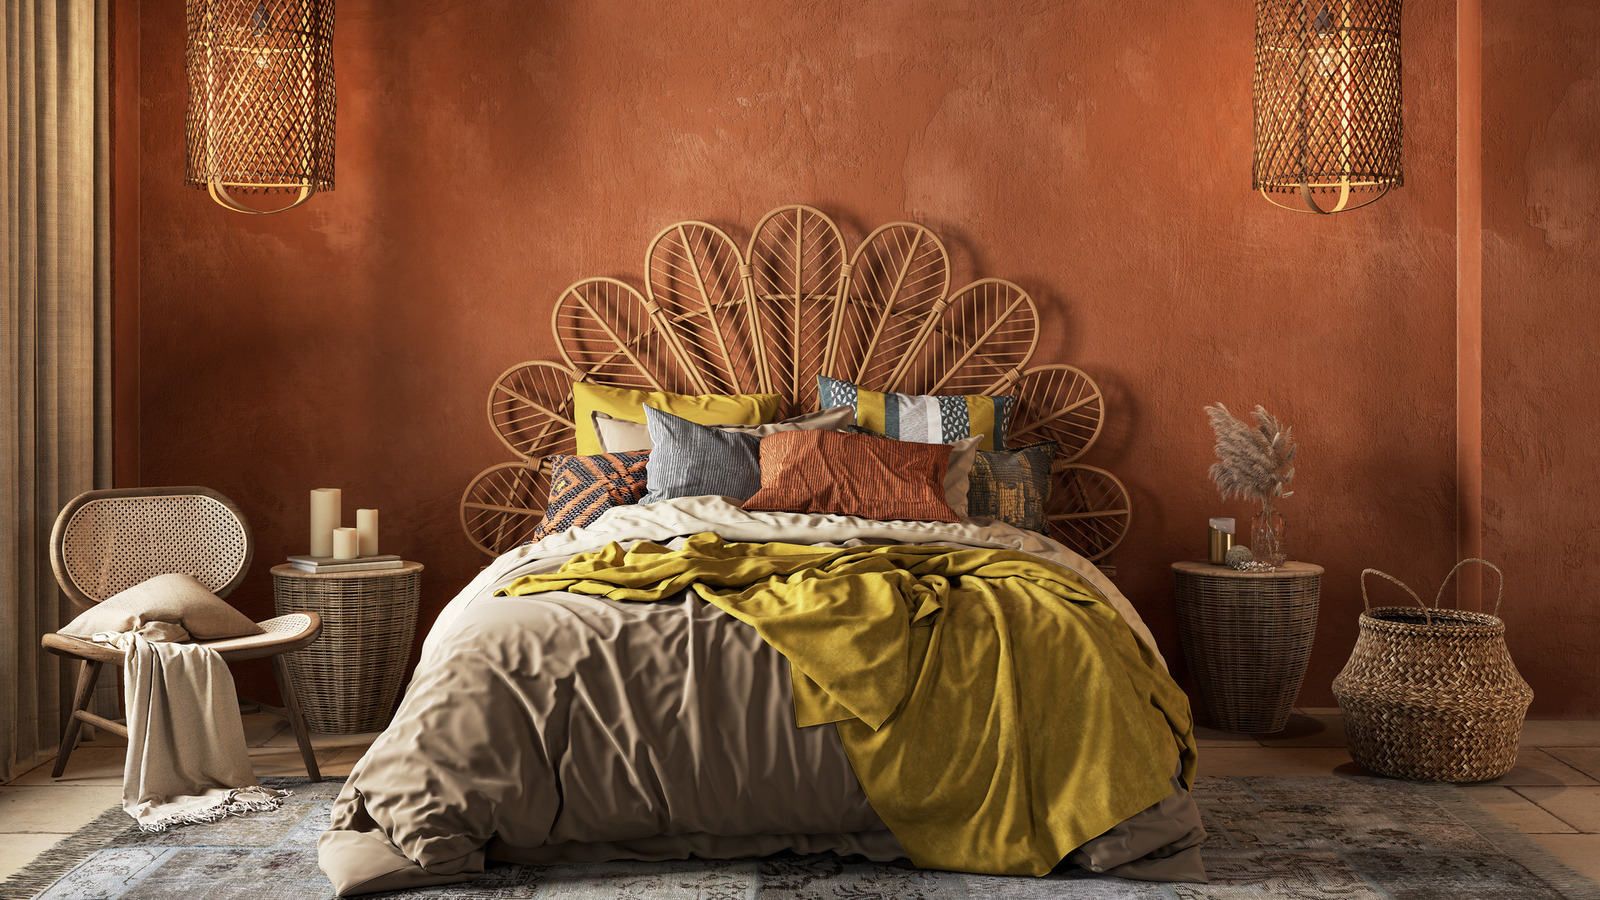 Terracotta decor – 10 ideas for using this warm earthy shade